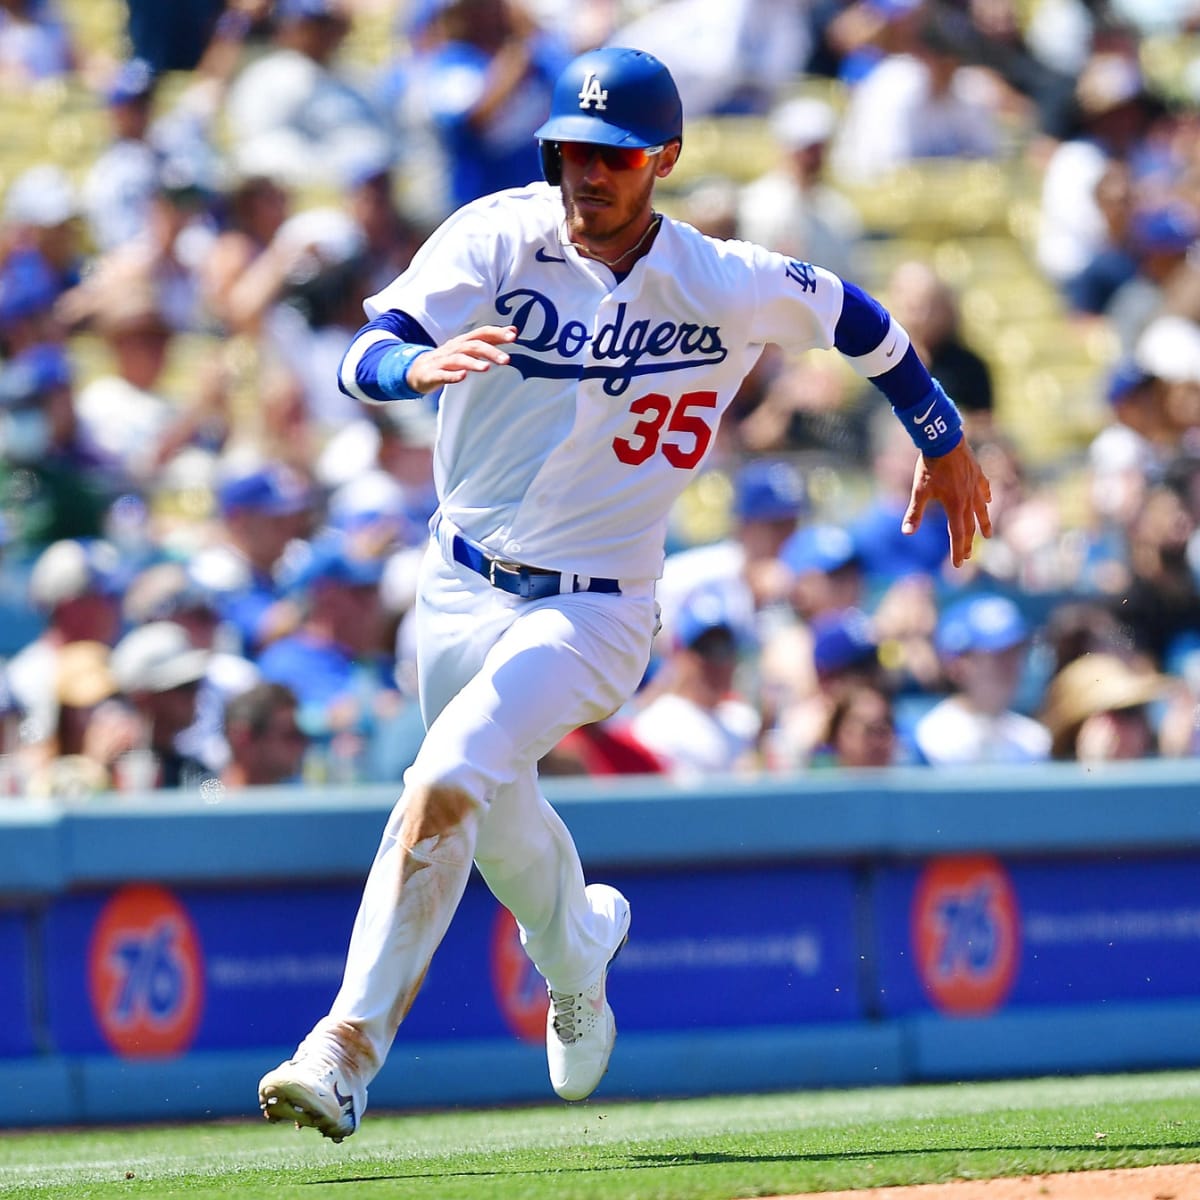 Dodgers: Cody Bellinger Hints at Future Position Change - Inside the Dodgers